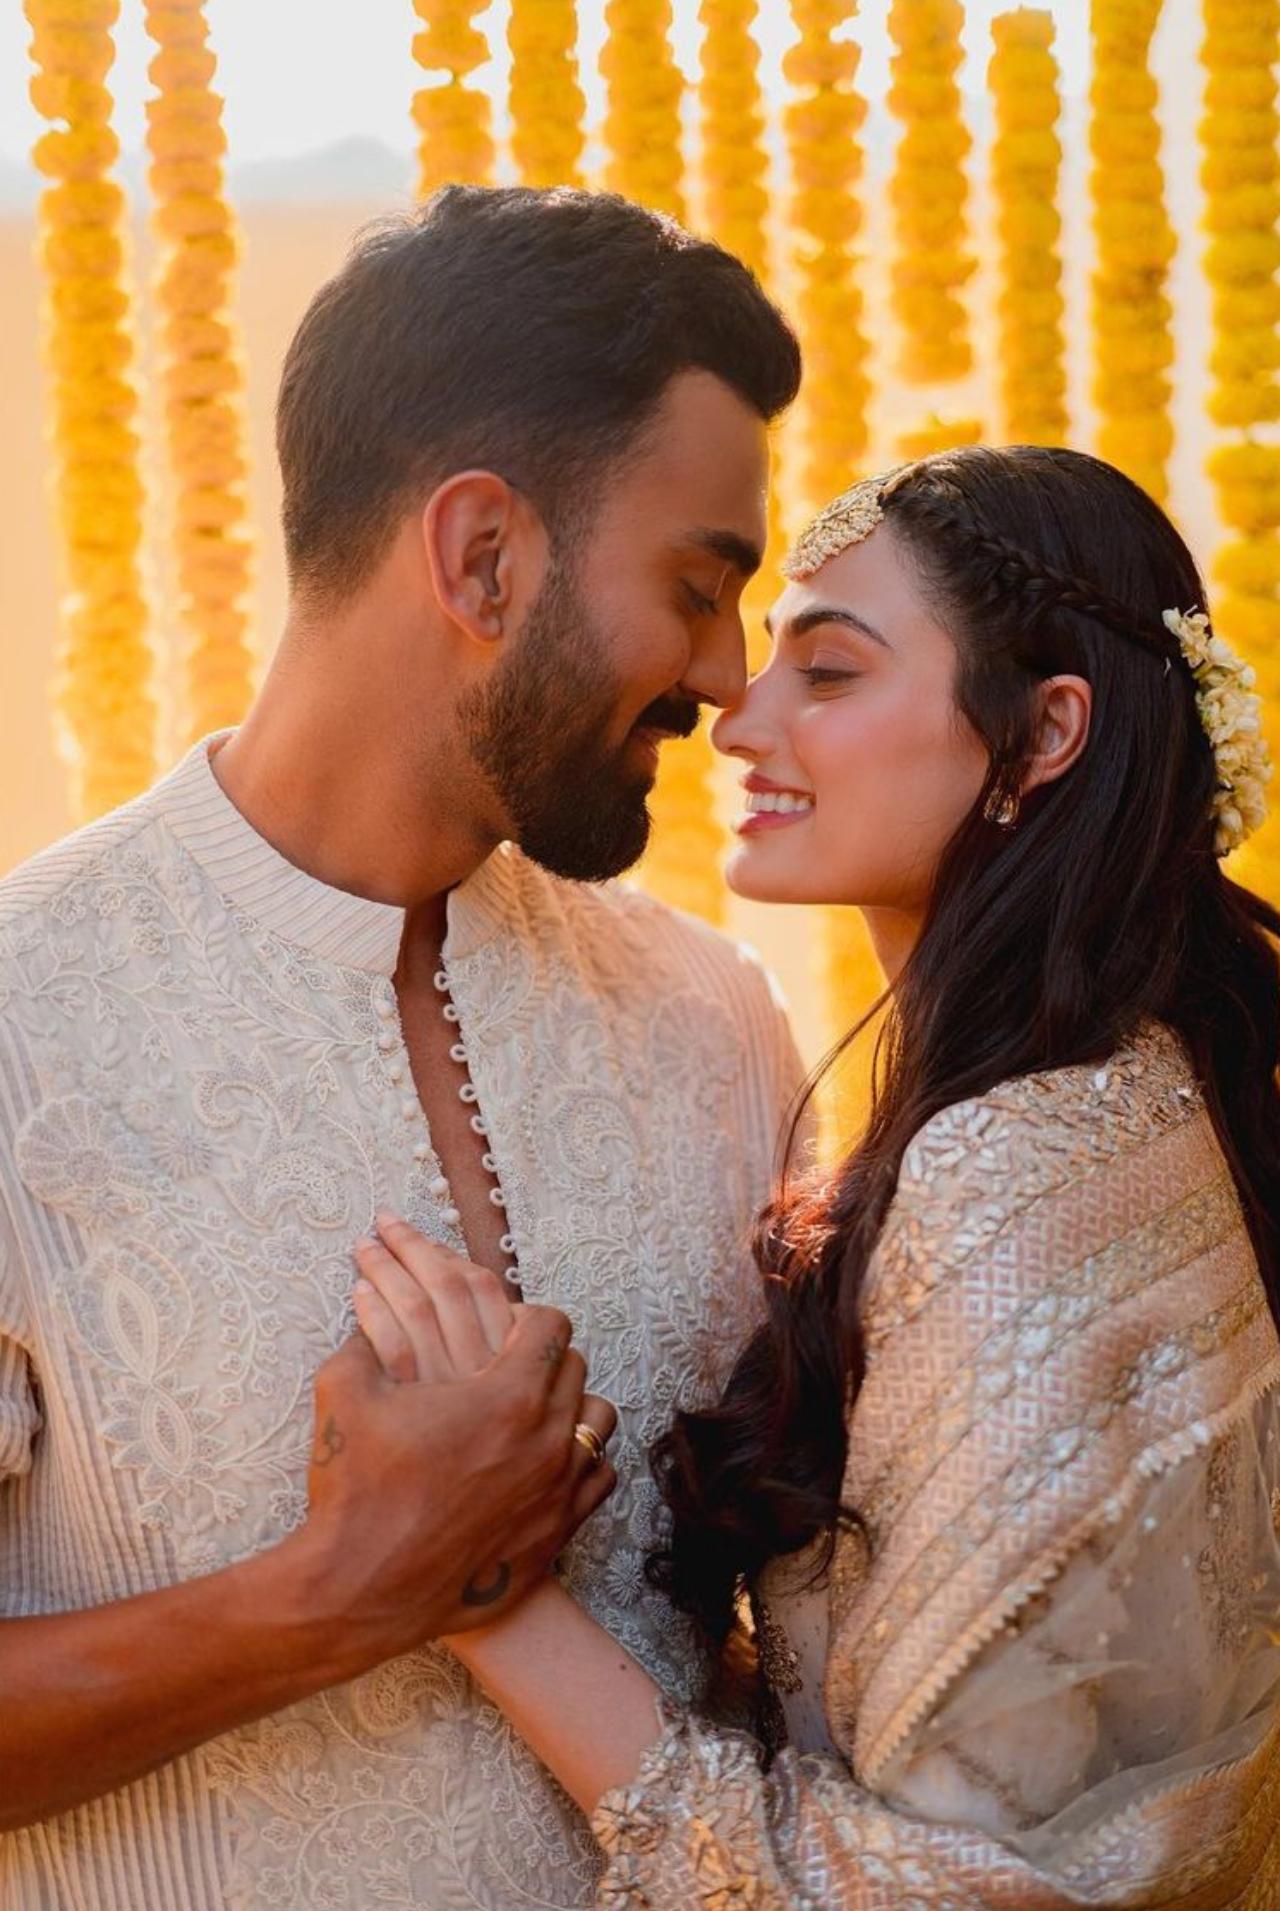 Rahul also shared a romantic picture with Athiya which was clicked before the haldi ceremony. The couple looked at each other lovingly in the picture